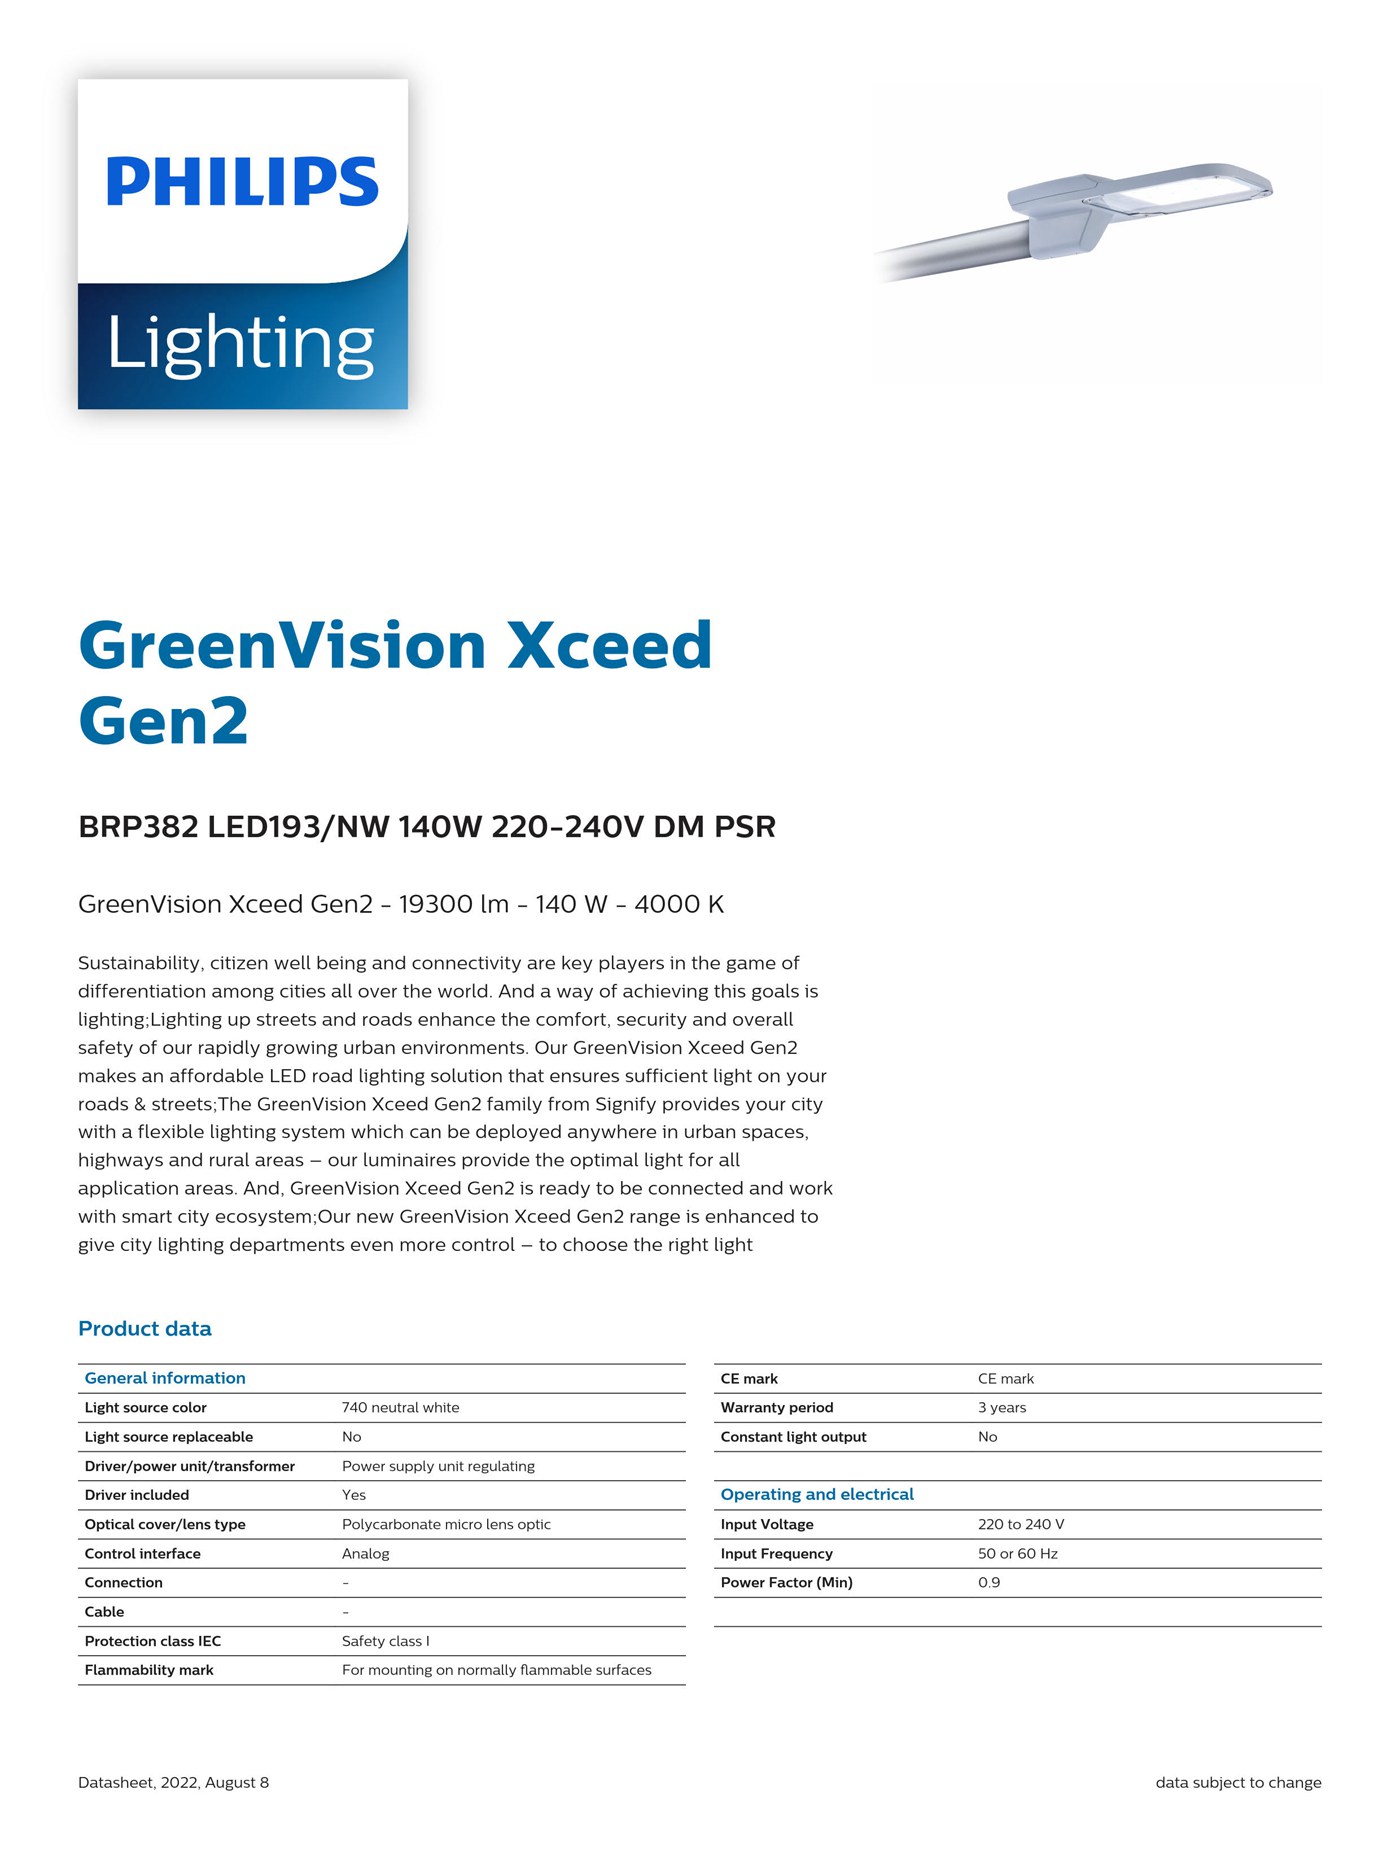 PHILIPS GreenVision Xceed Gen2 BRP382 LED93/NW 140W 220-240V DM PSR 911401875398